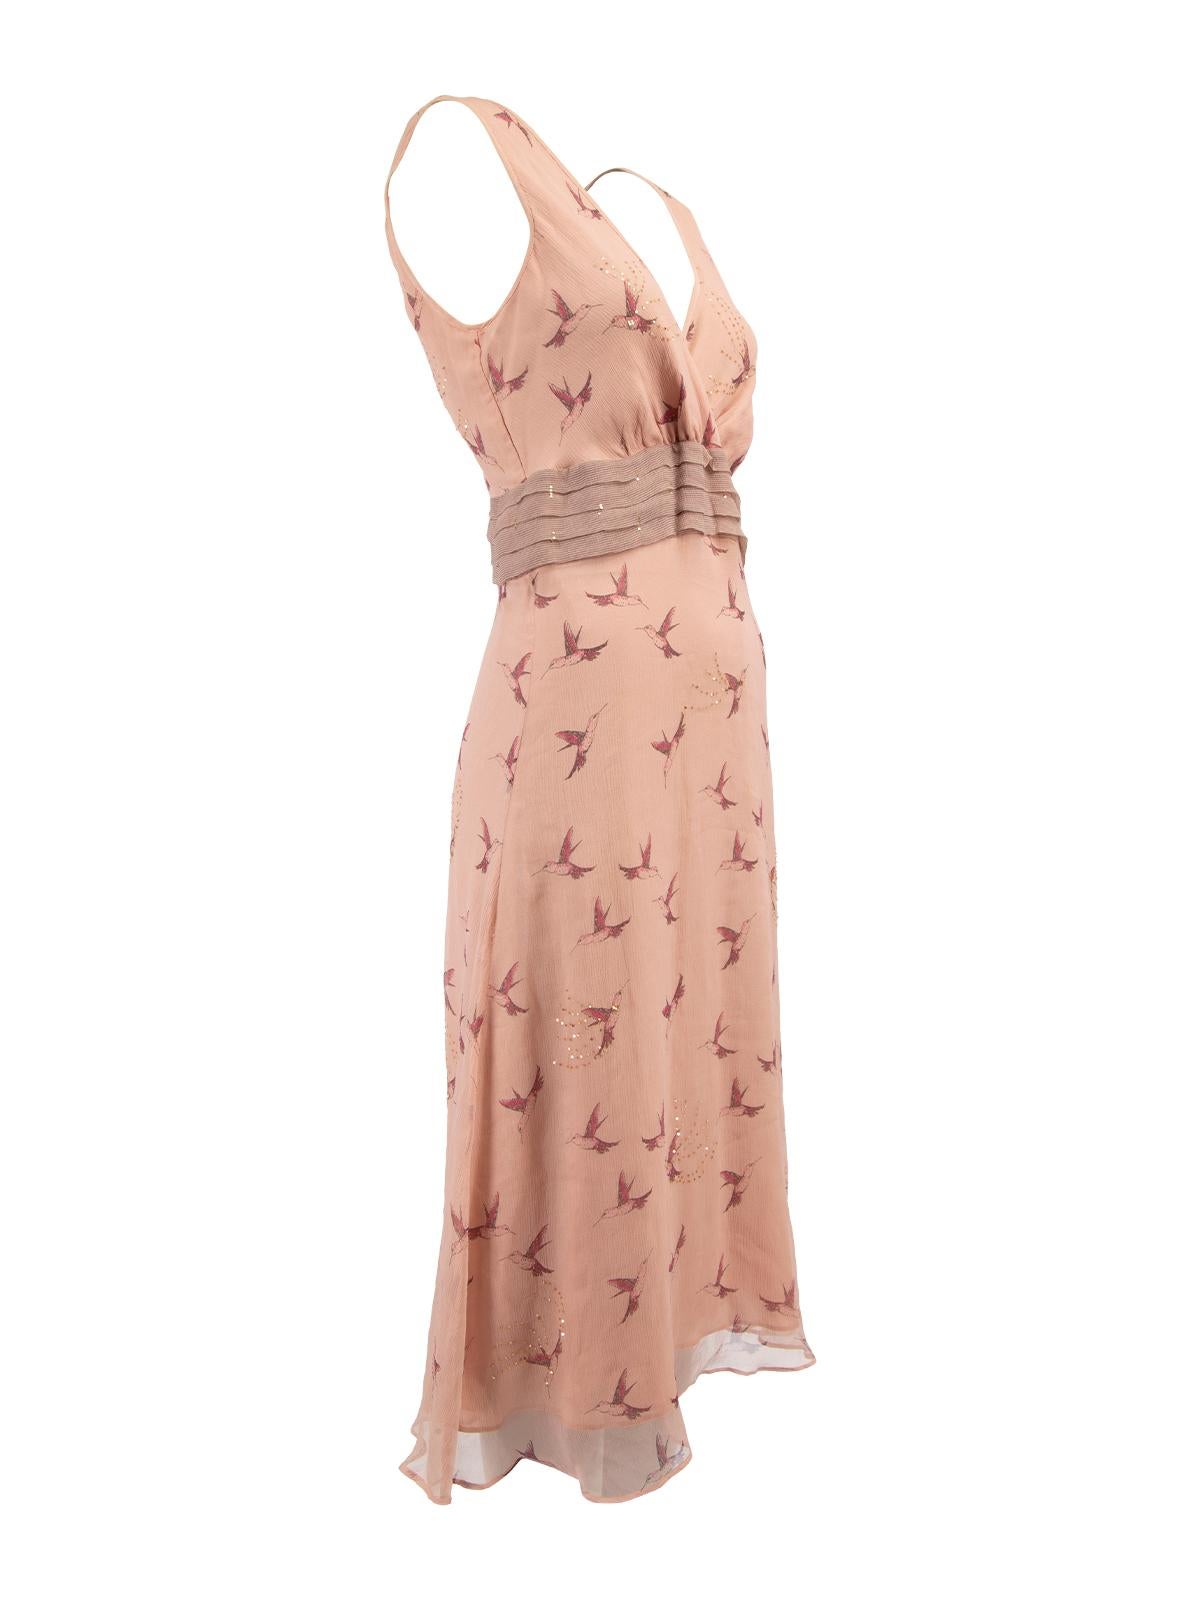 CONDITION is Very good. Hardly any visible wear is evident. Some loose threads and missing sequins can be seen on the back of this used Temperley London designer resale item. Details Pink Silk Maxi dress Sleeveless Plunge neckline Hummingbird